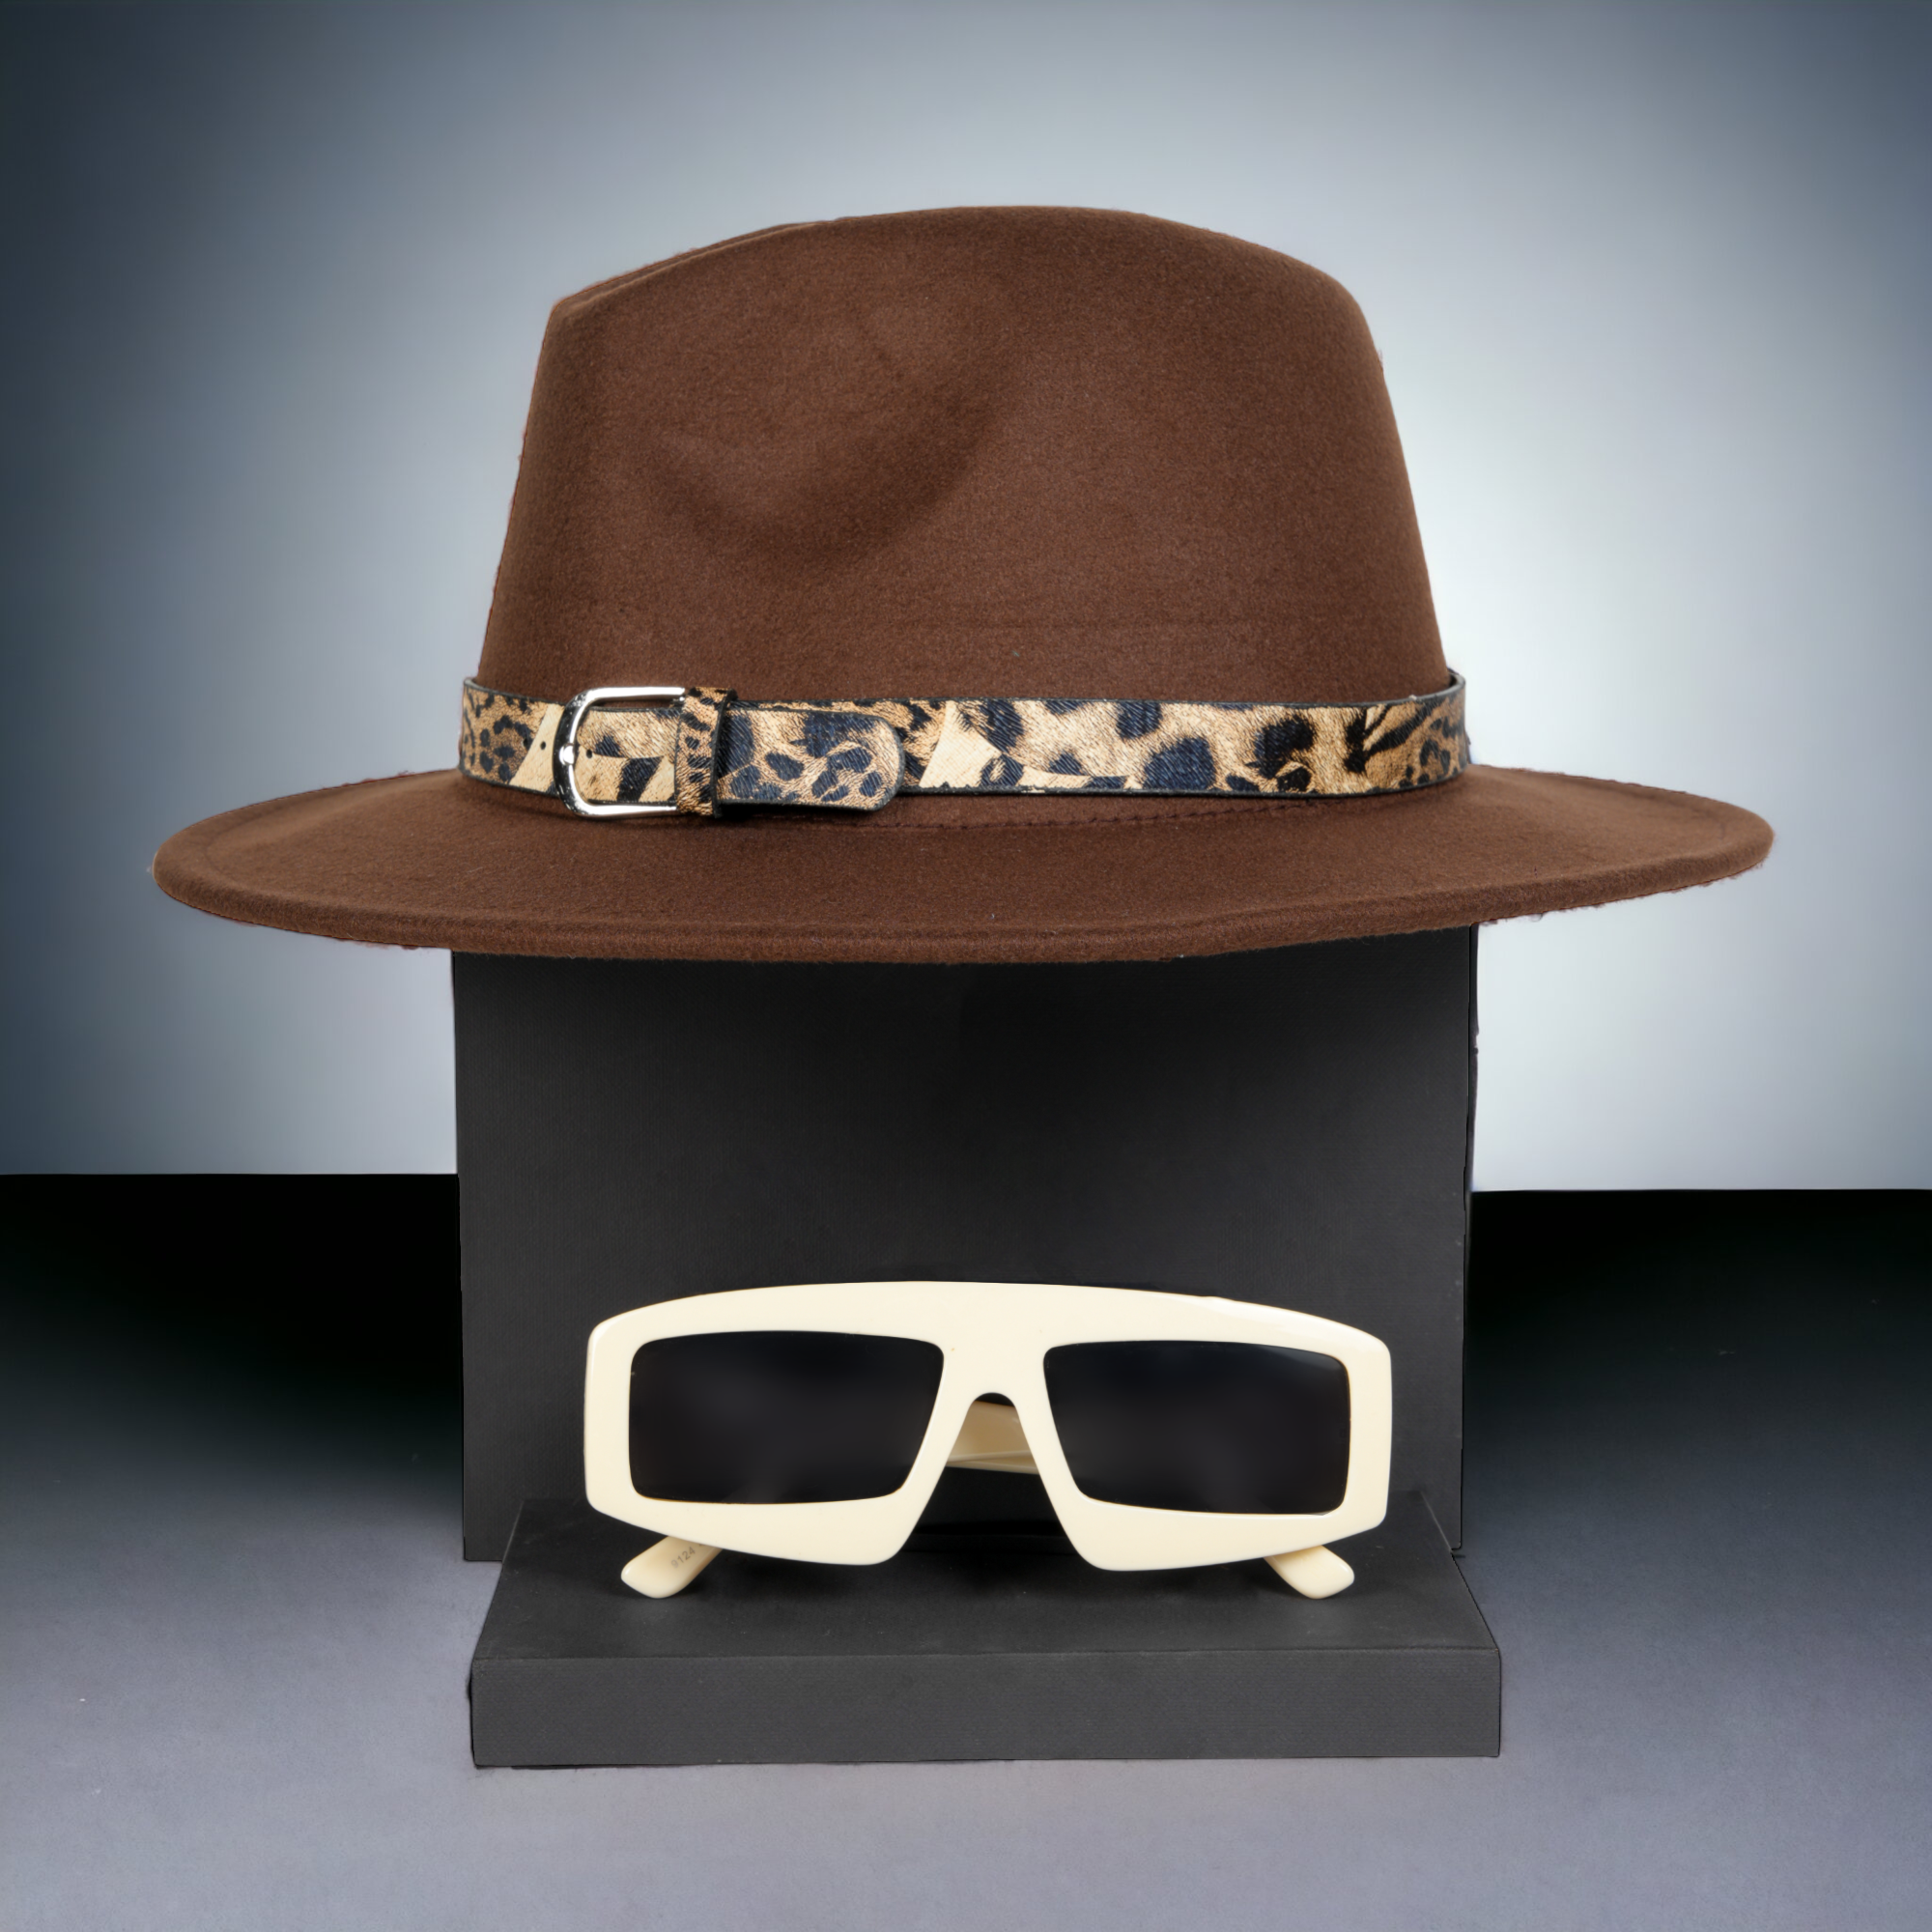 Chokore Special 2-in-1 Gift Set for Her (Fedora Hat & Sunglasses)